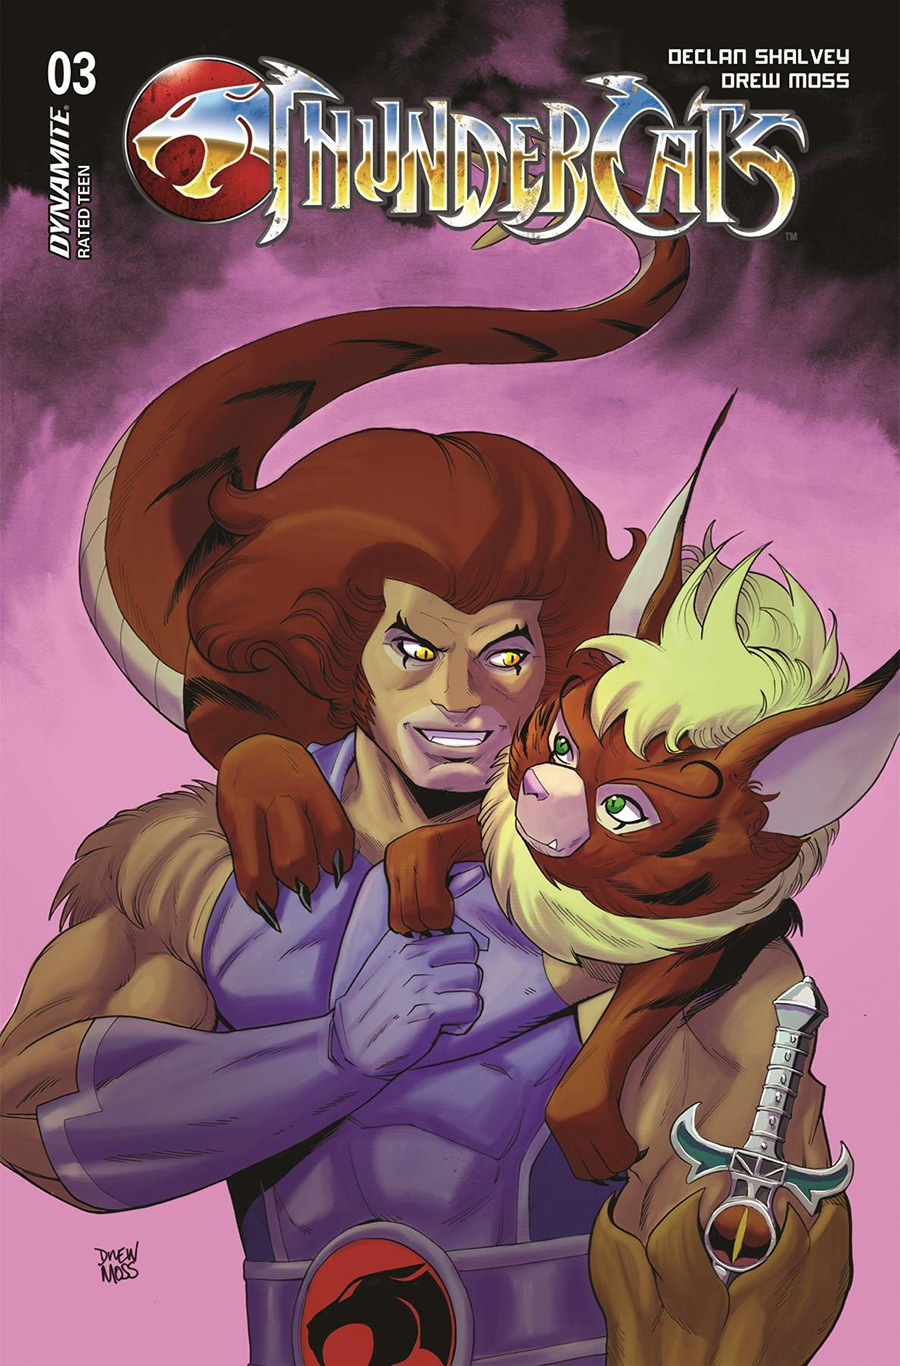 Thundercats Vol 3 #3 Cover W Variant Drew Moss Snarf Cover